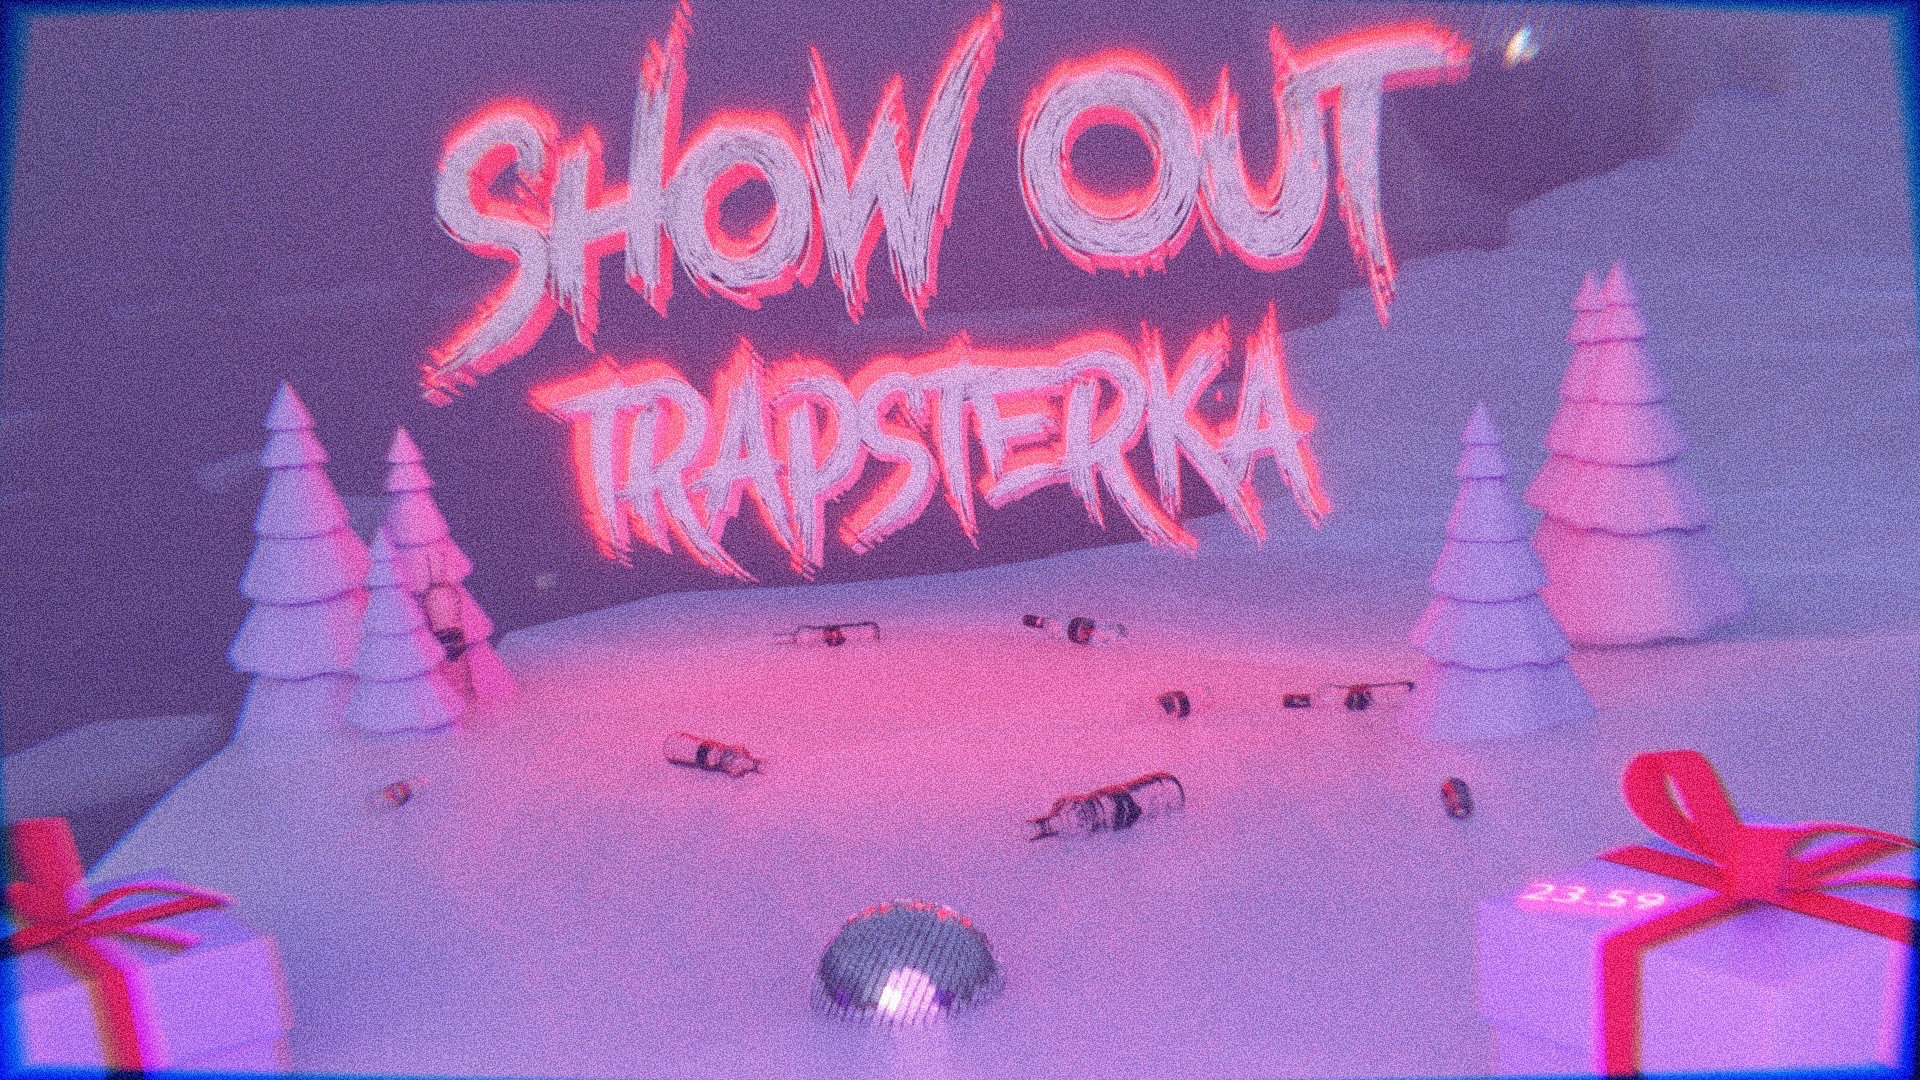 SHOW.OUT TRAPSTERKA